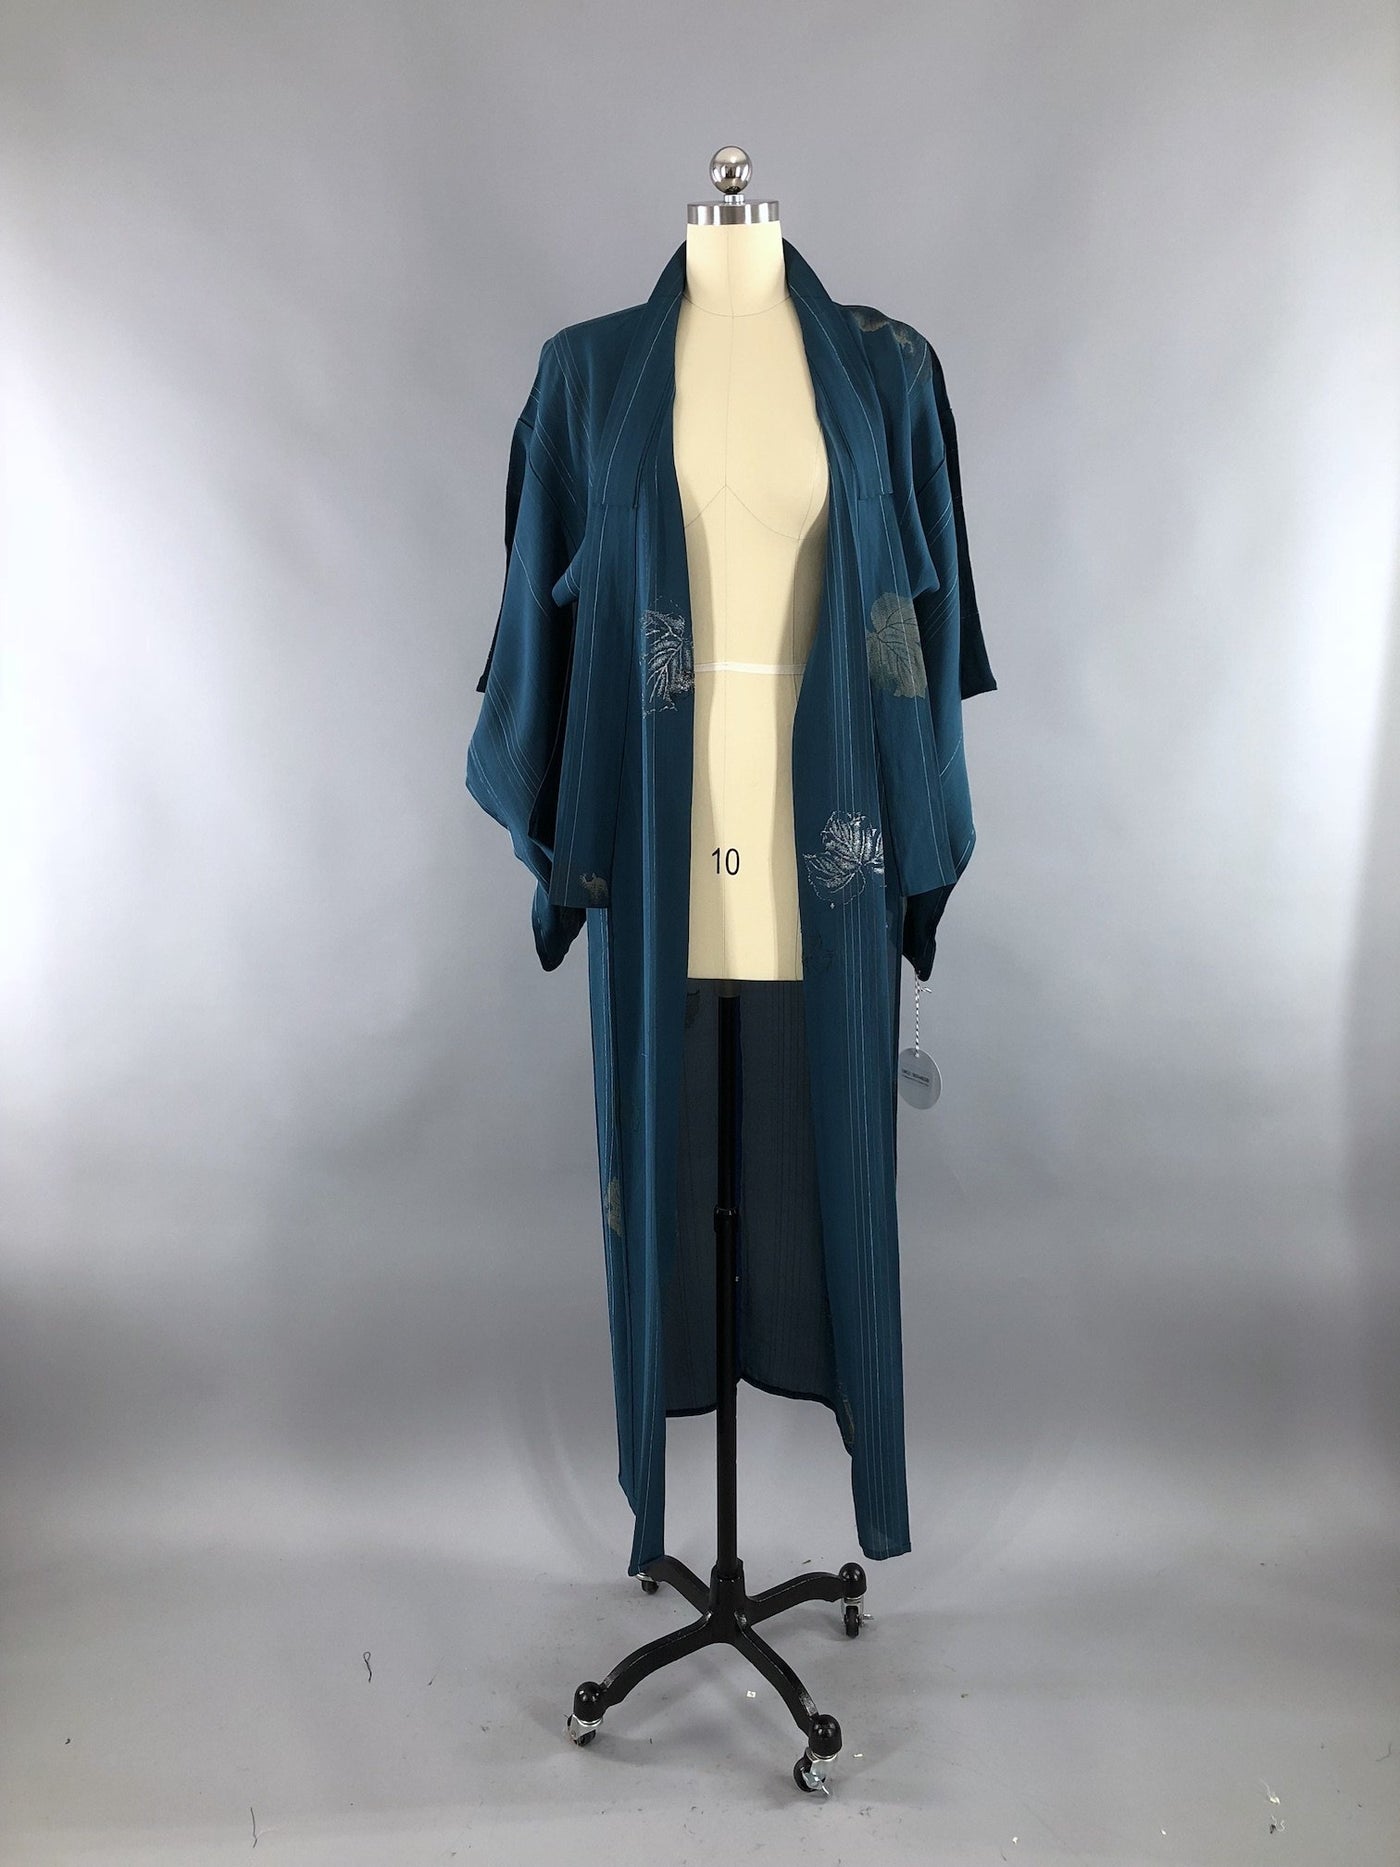 Vintage Silk Crepe Kimono Robe / Teal Blue Green with Silver & Gold Embroidery Leaves - ThisBlueBird